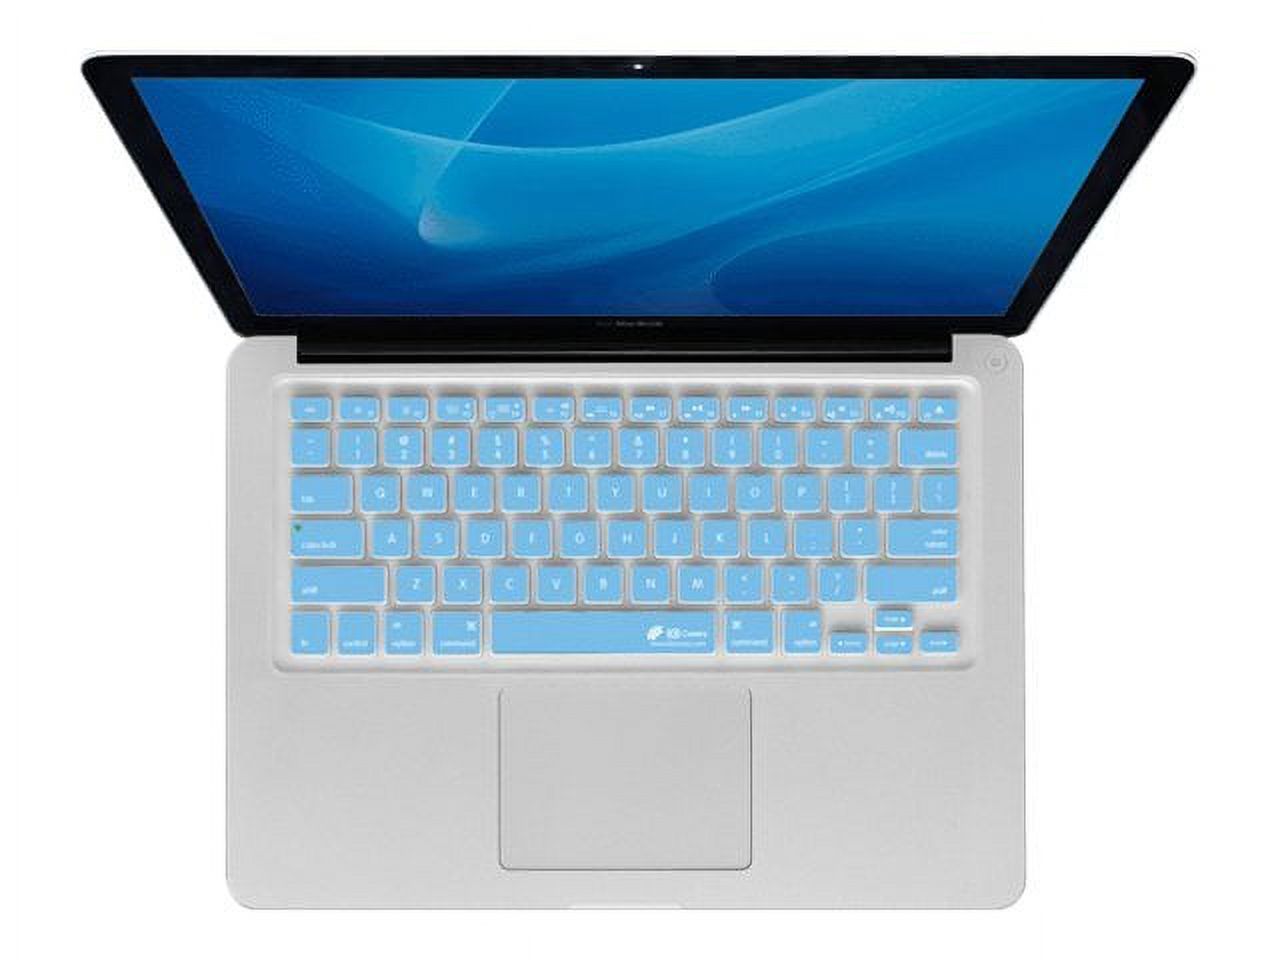 KB Covers Checkerboard Keyboard Cover CB-M-Blue - Notebook keyboard protector - blue, clear - image 1 of 3